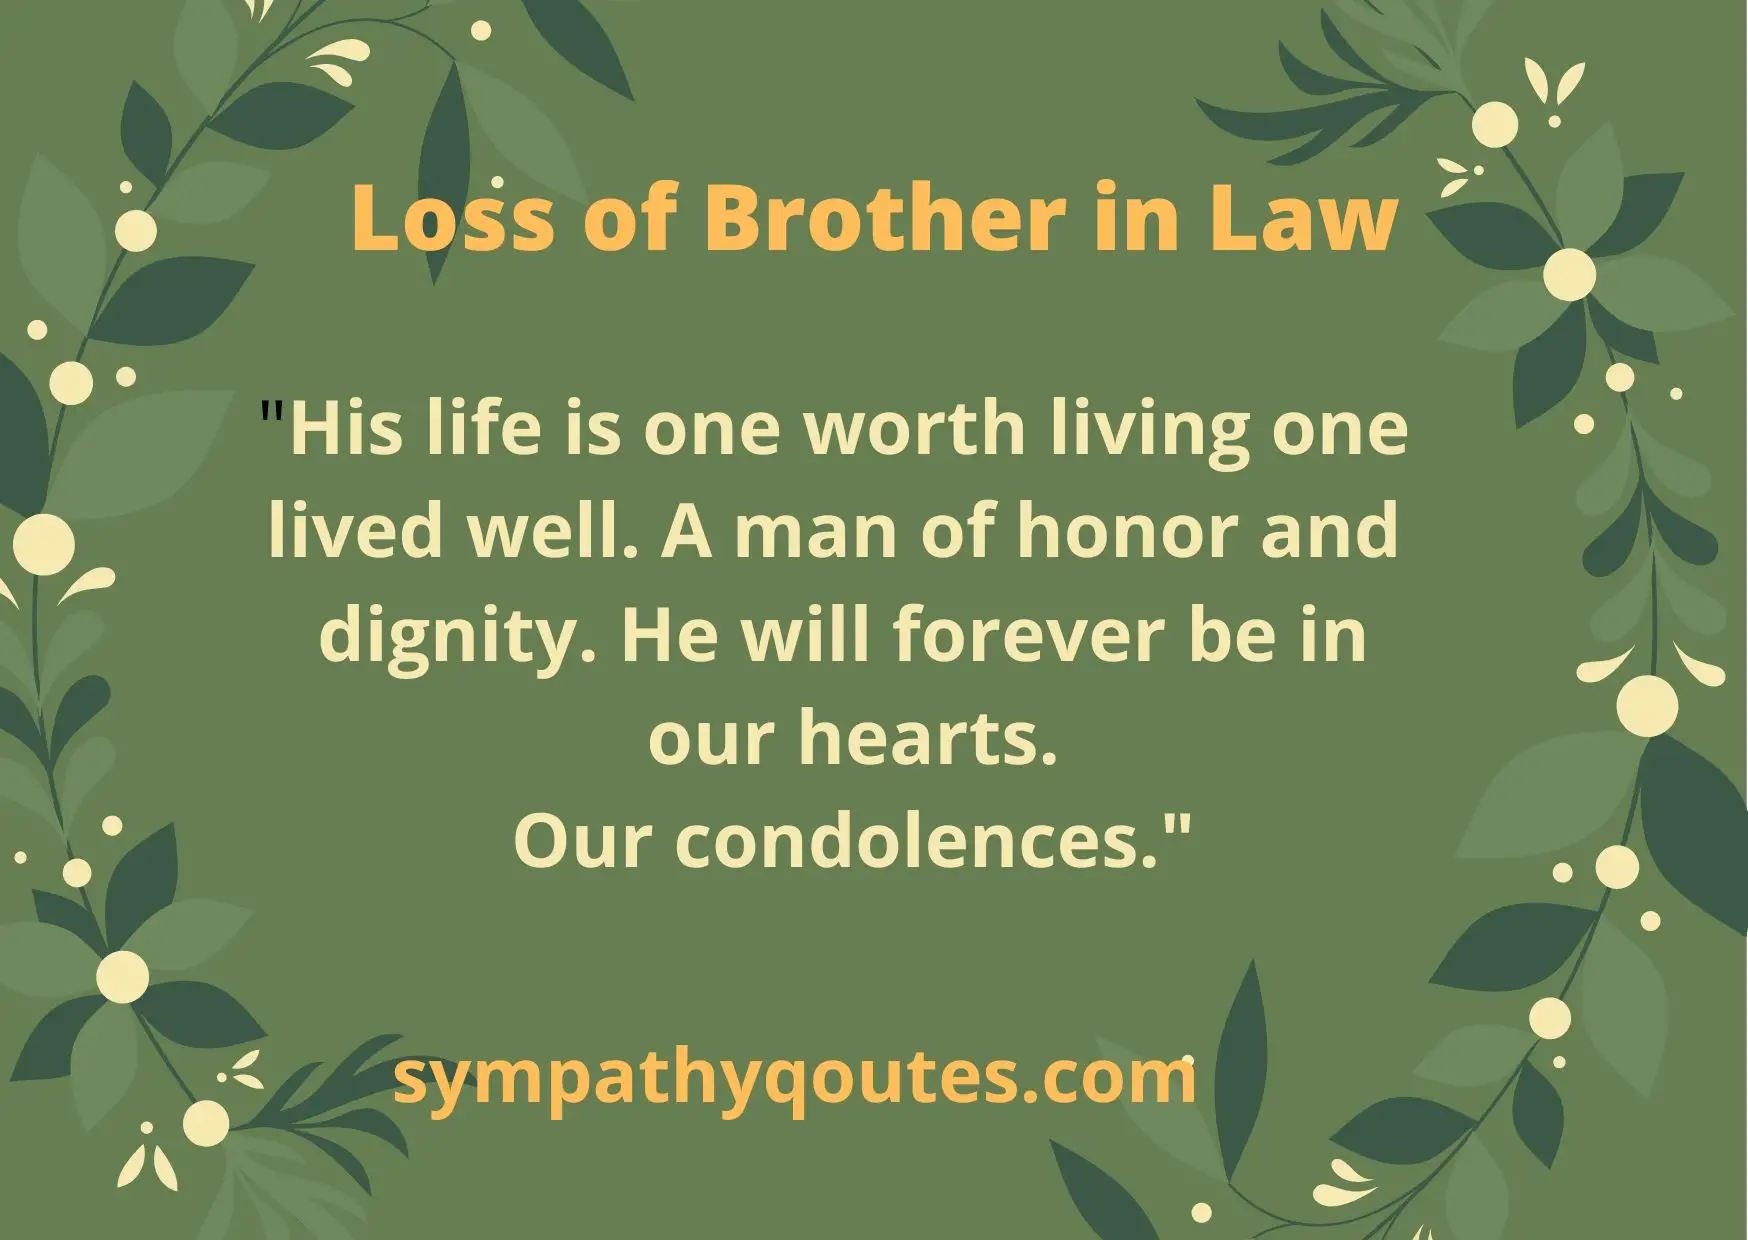 Words of Condolence For the Loss of Brother in Law